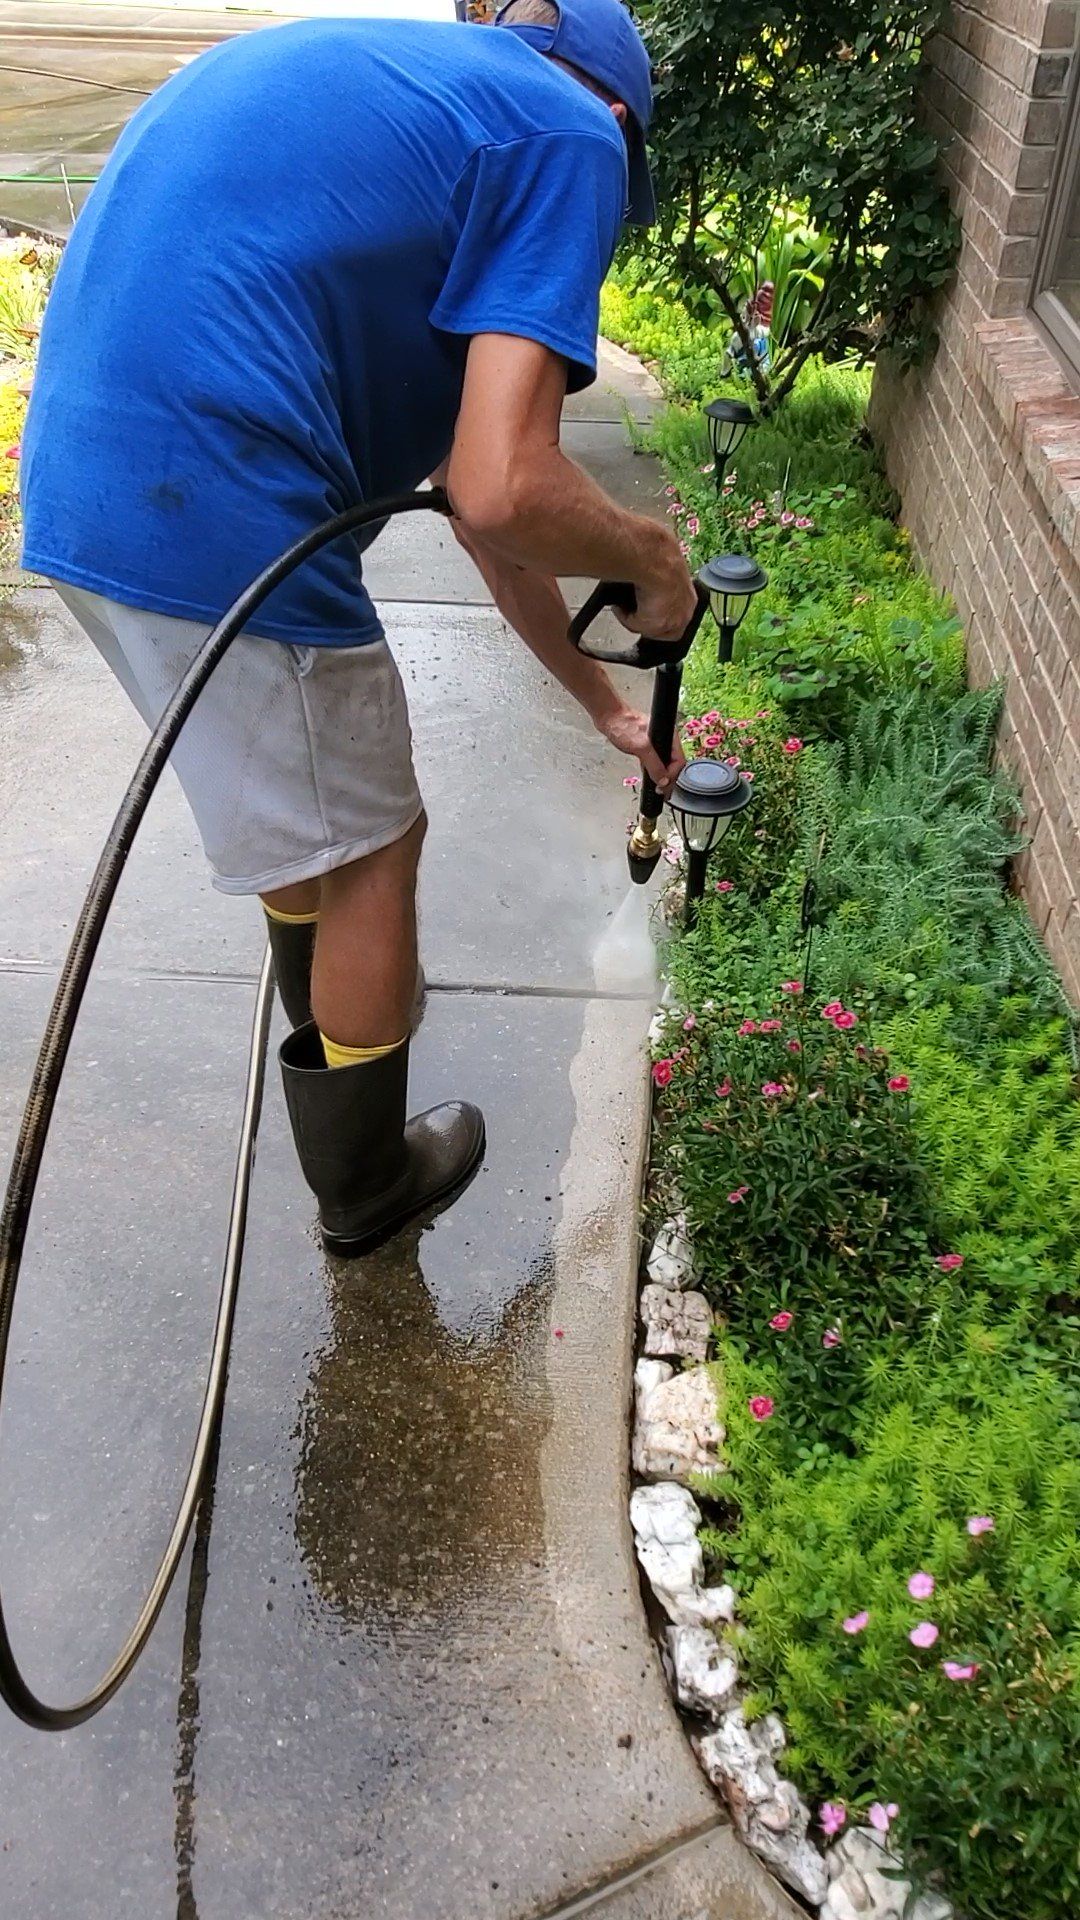 A man is cleaning a sidewalk with a pressure washer.